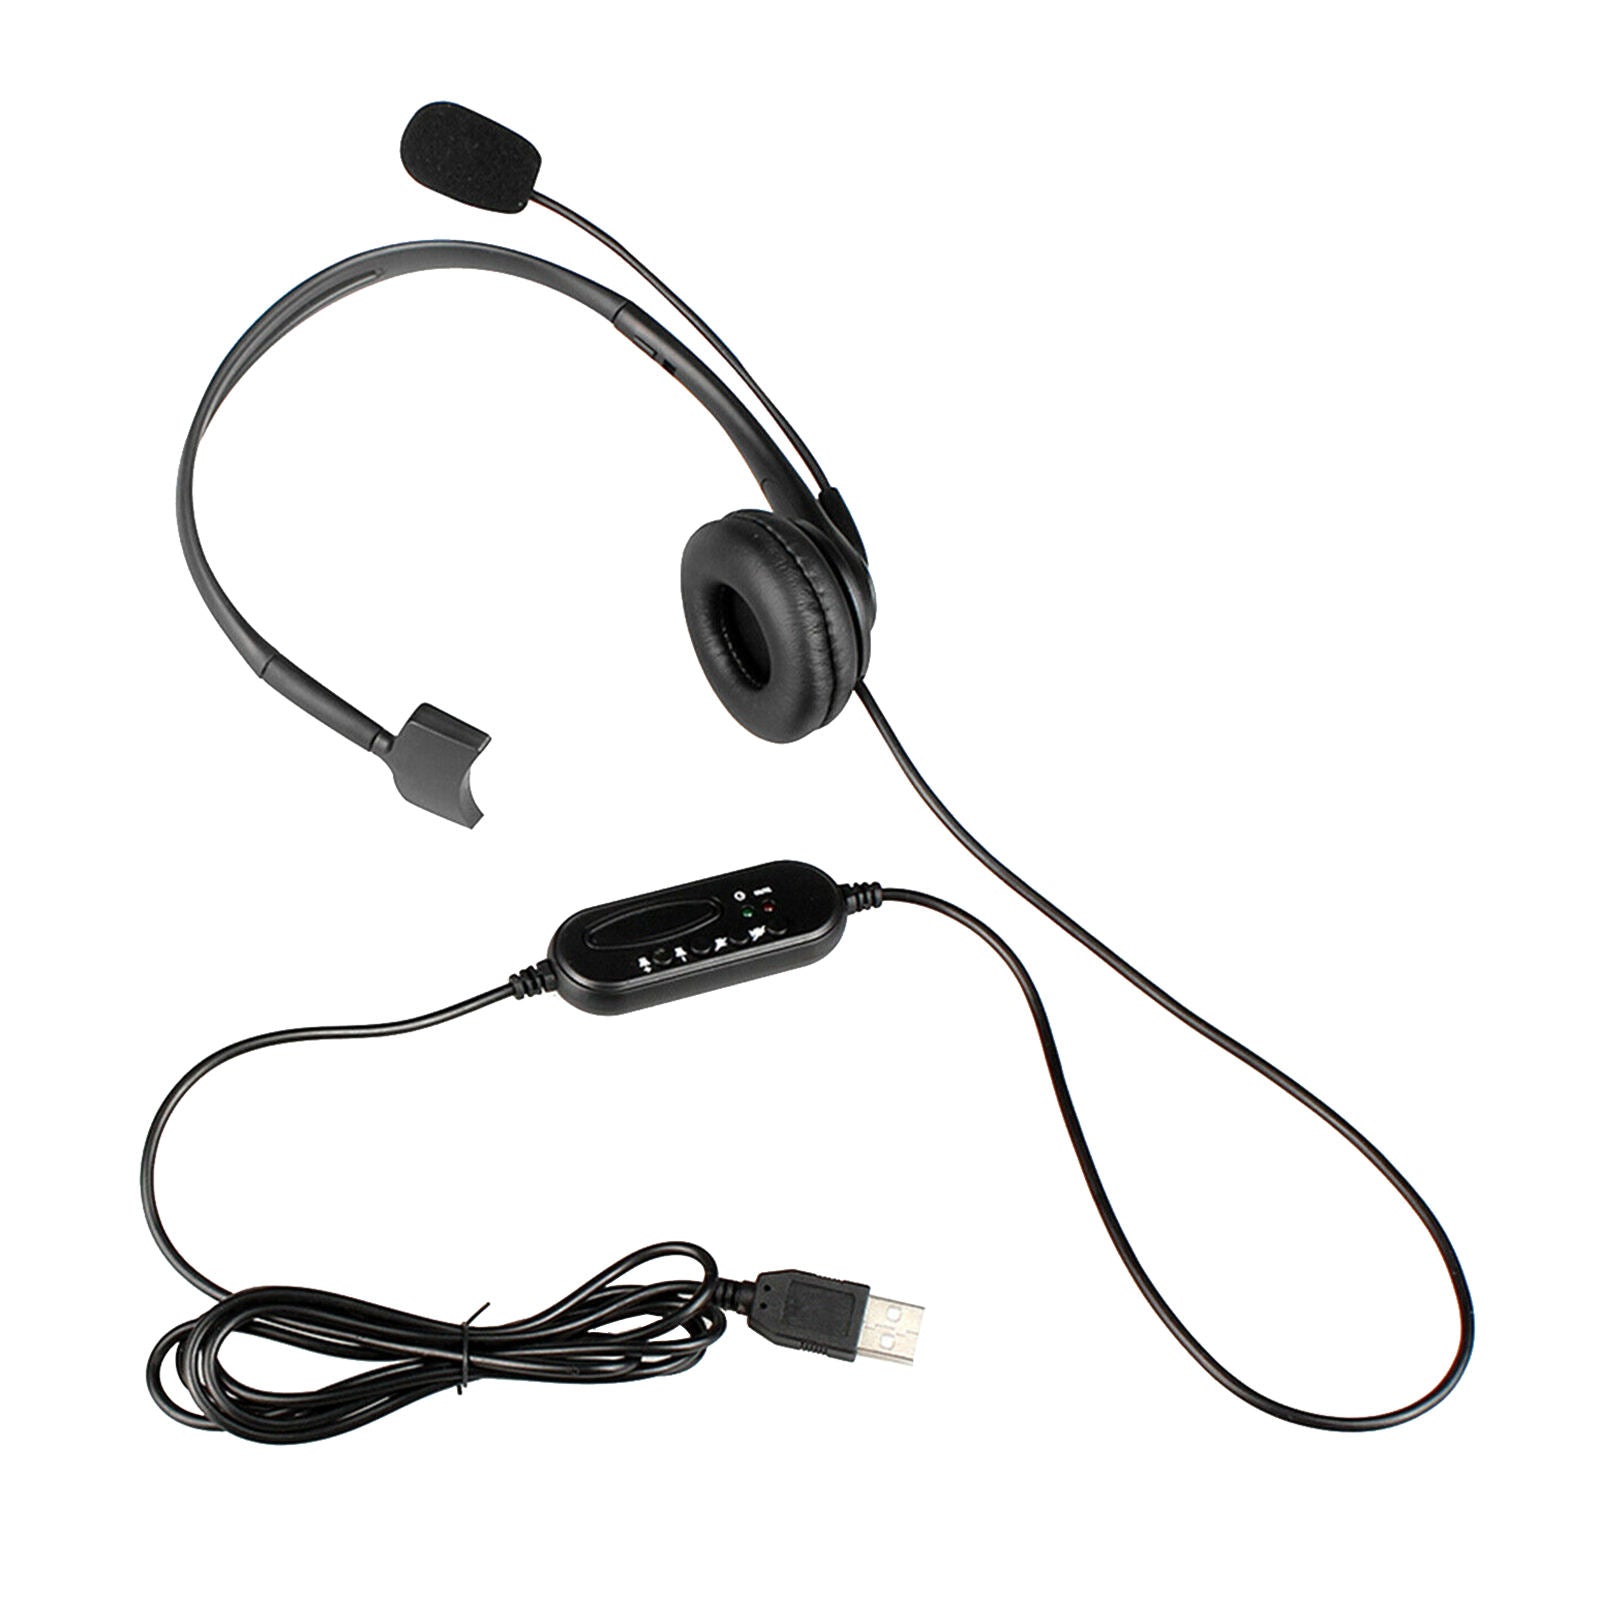 Microphone headset for laptop pc call center computer chat usb noise